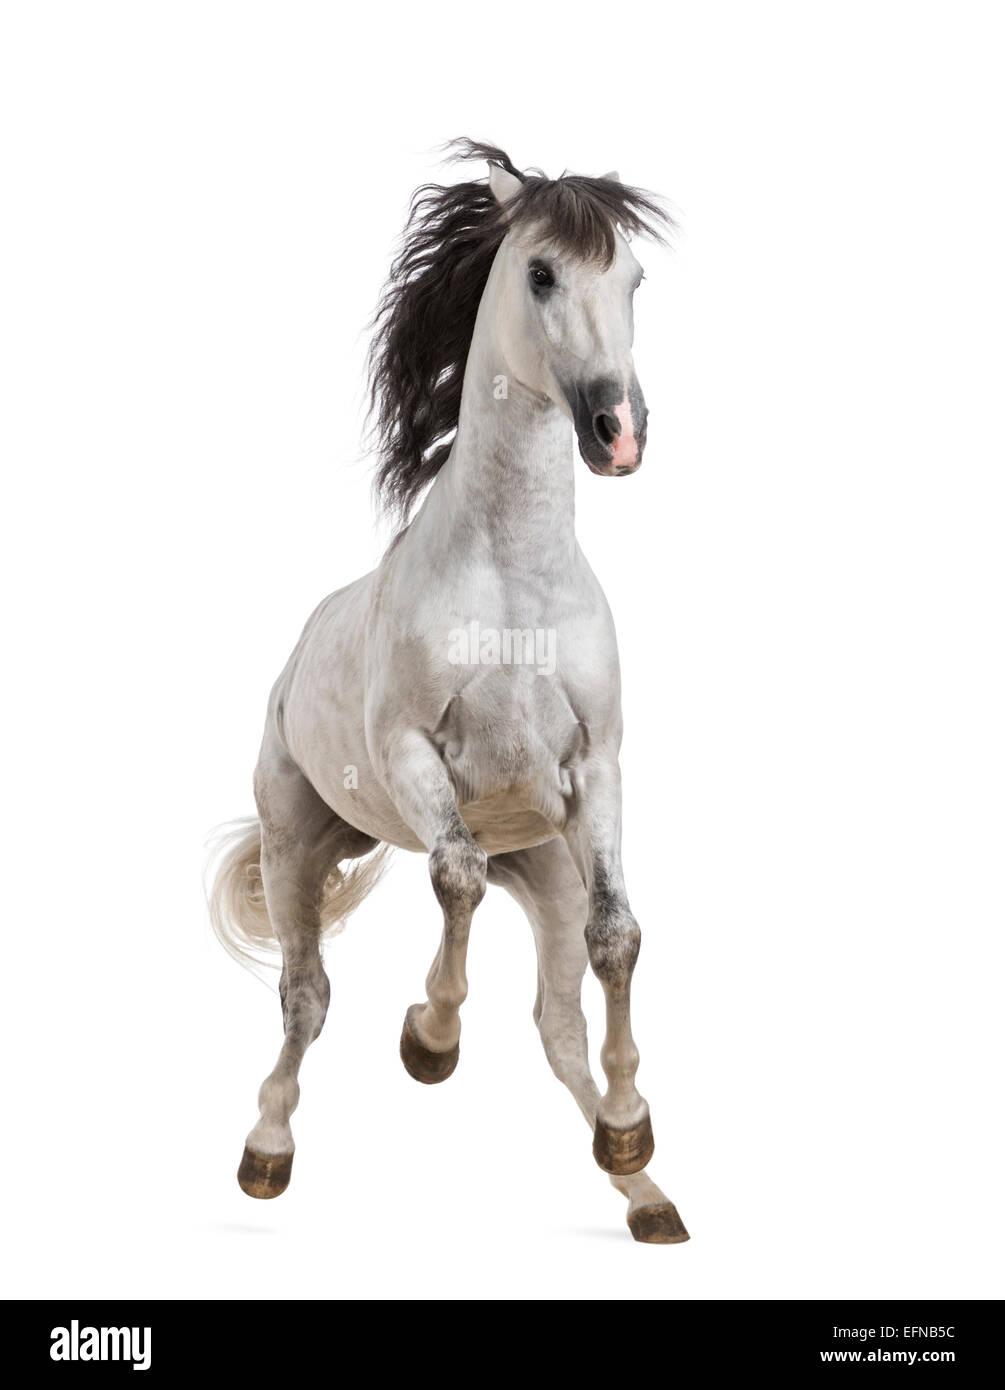 Andalusian horse galloping against white background Stock Photo